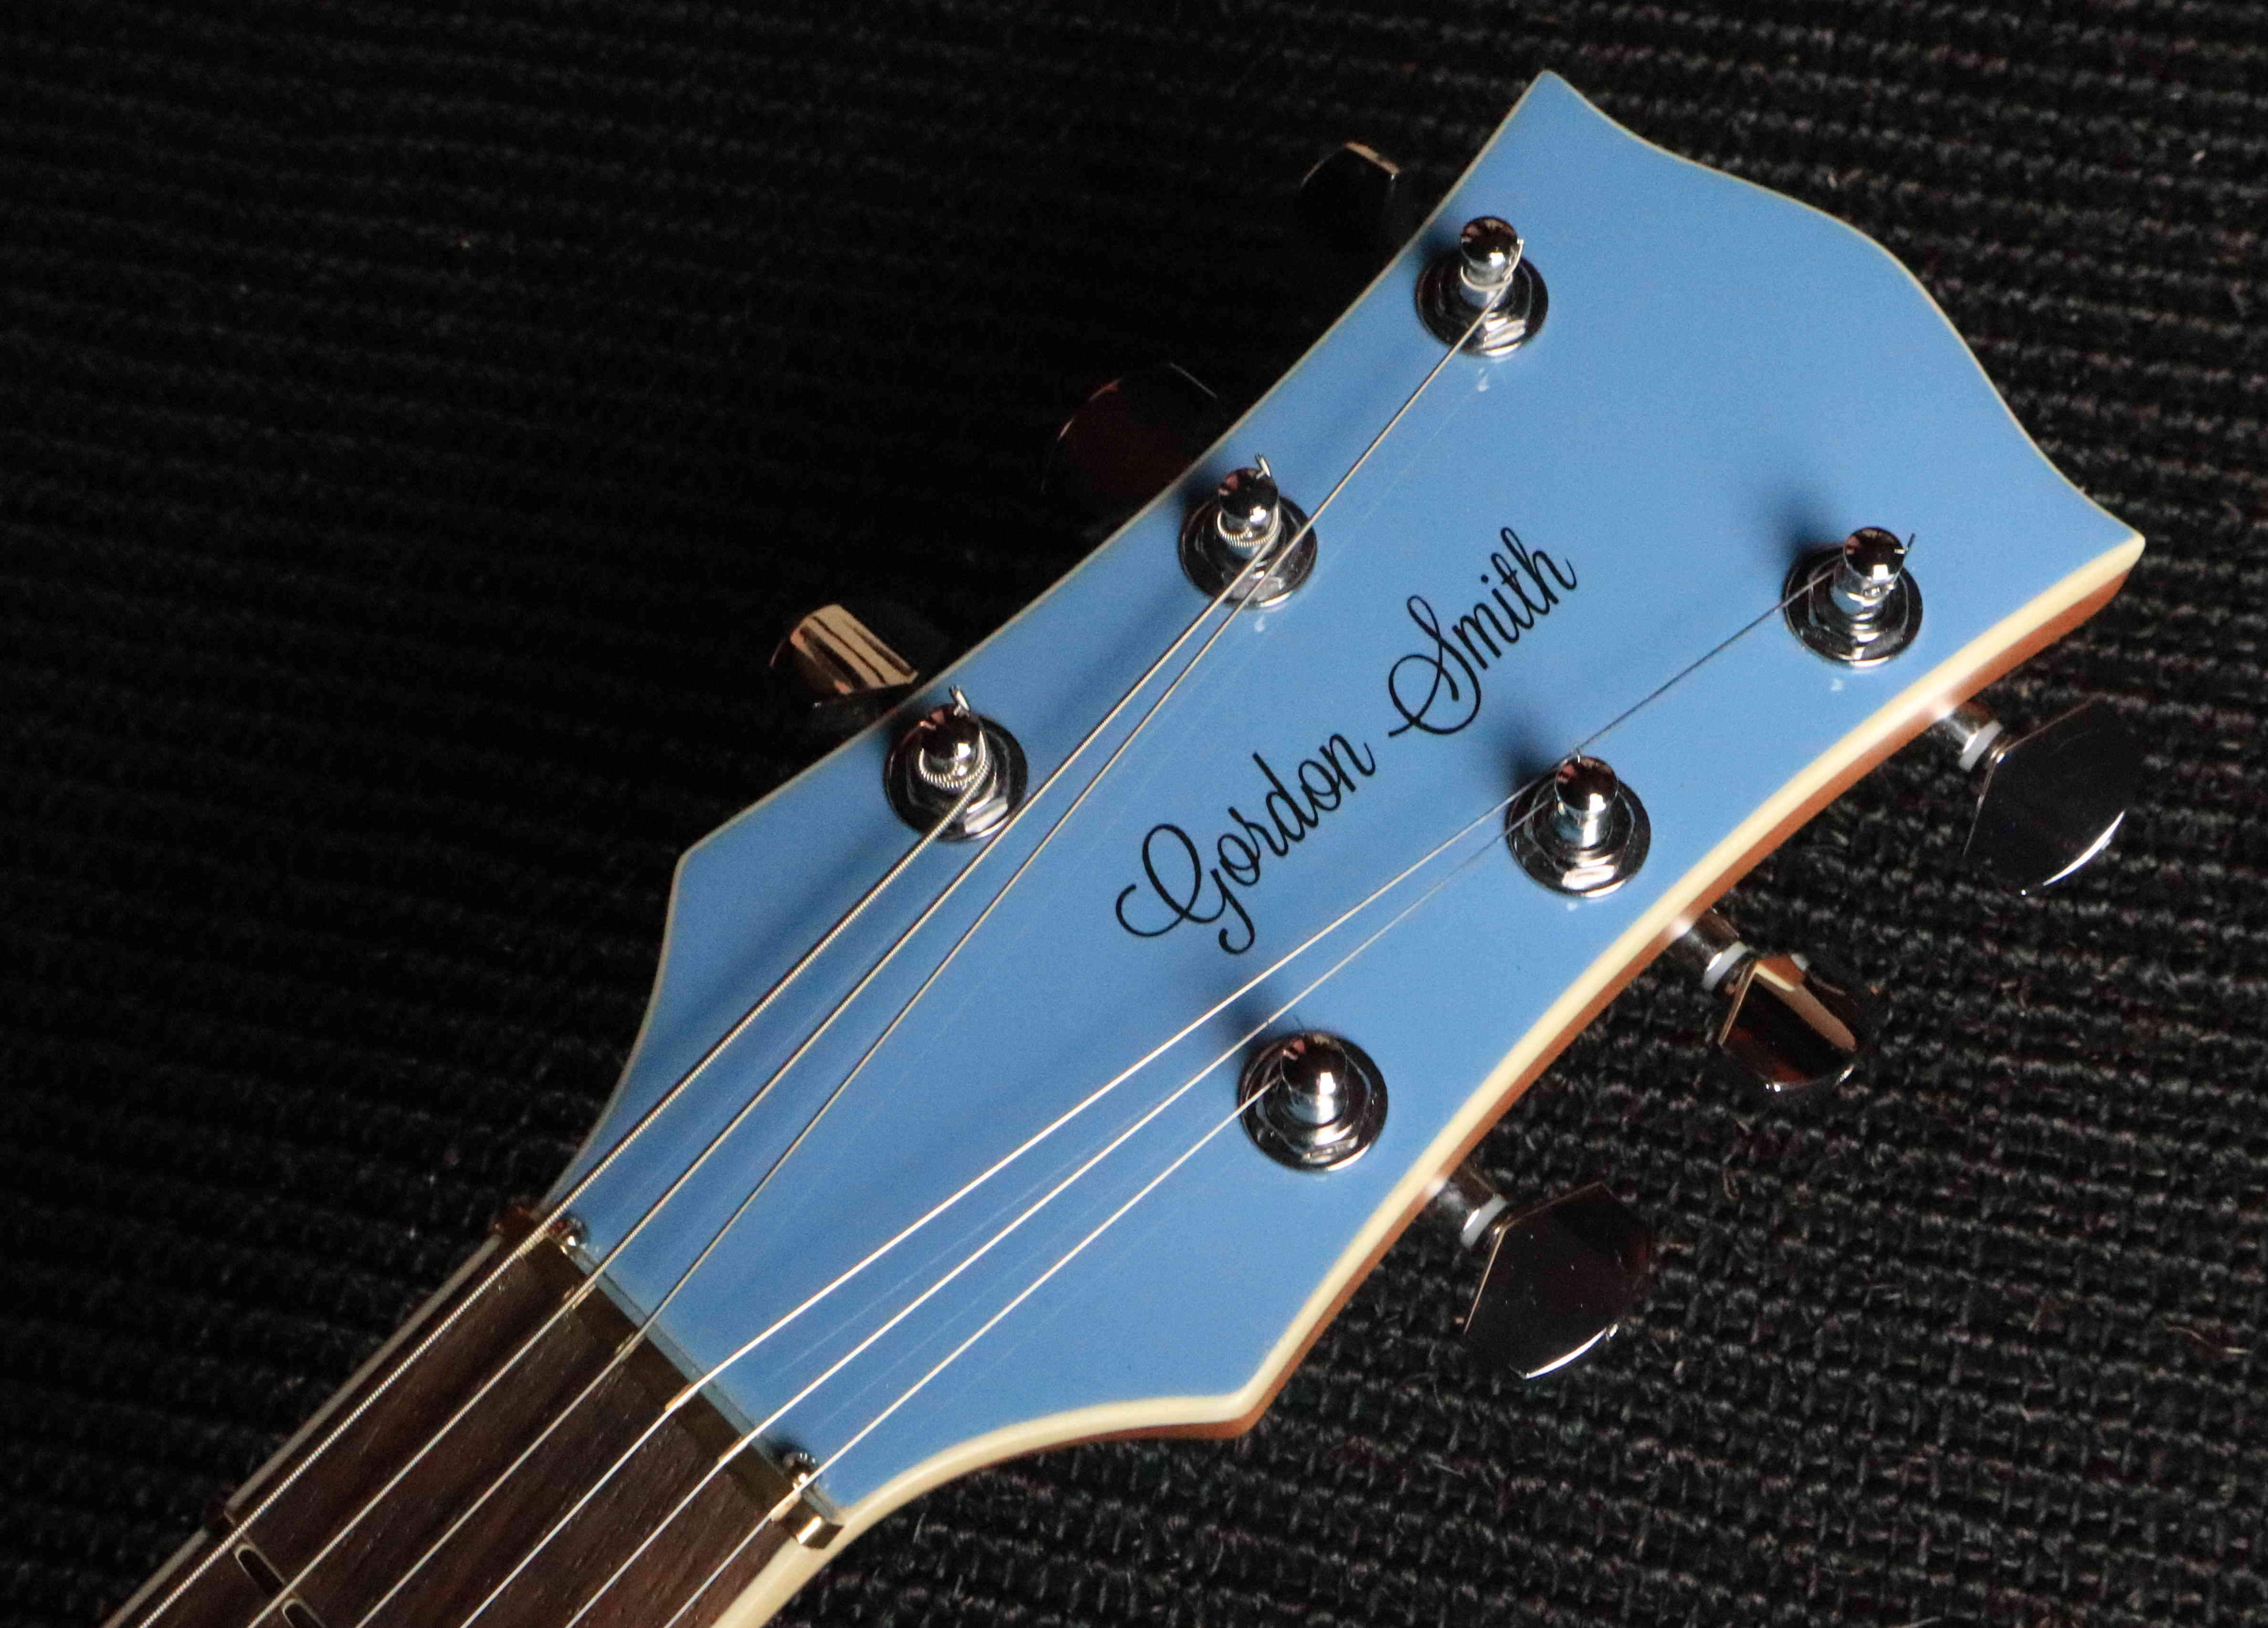 Gordon Smith GS1000 Blue, Electric Guitar for sale at Richards Guitars.